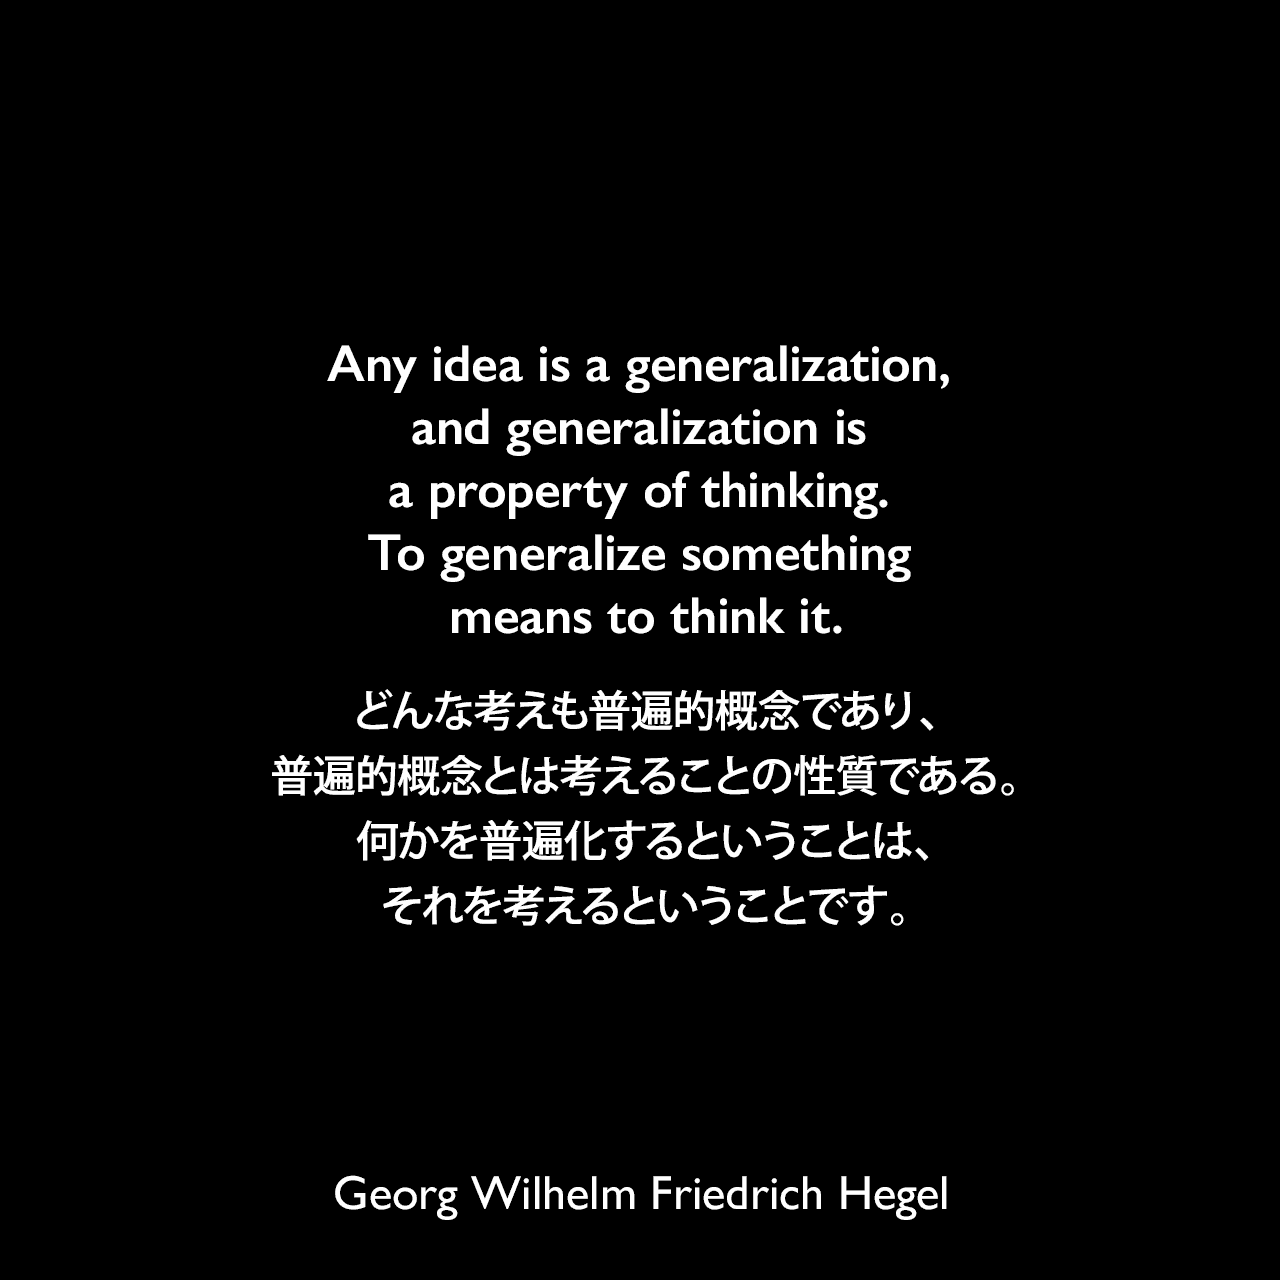 Any idea is a generalization, and generalization is a property of thinking. To generalize something means to think it.どんな考えも普遍的概念であり、普遍的概念とは考えることの性質である。何かを普遍化するということは、それを考えるということです。- ヘーゲルによる本「法の哲学」よりGeorg Wilhelm Friedrich Hegel